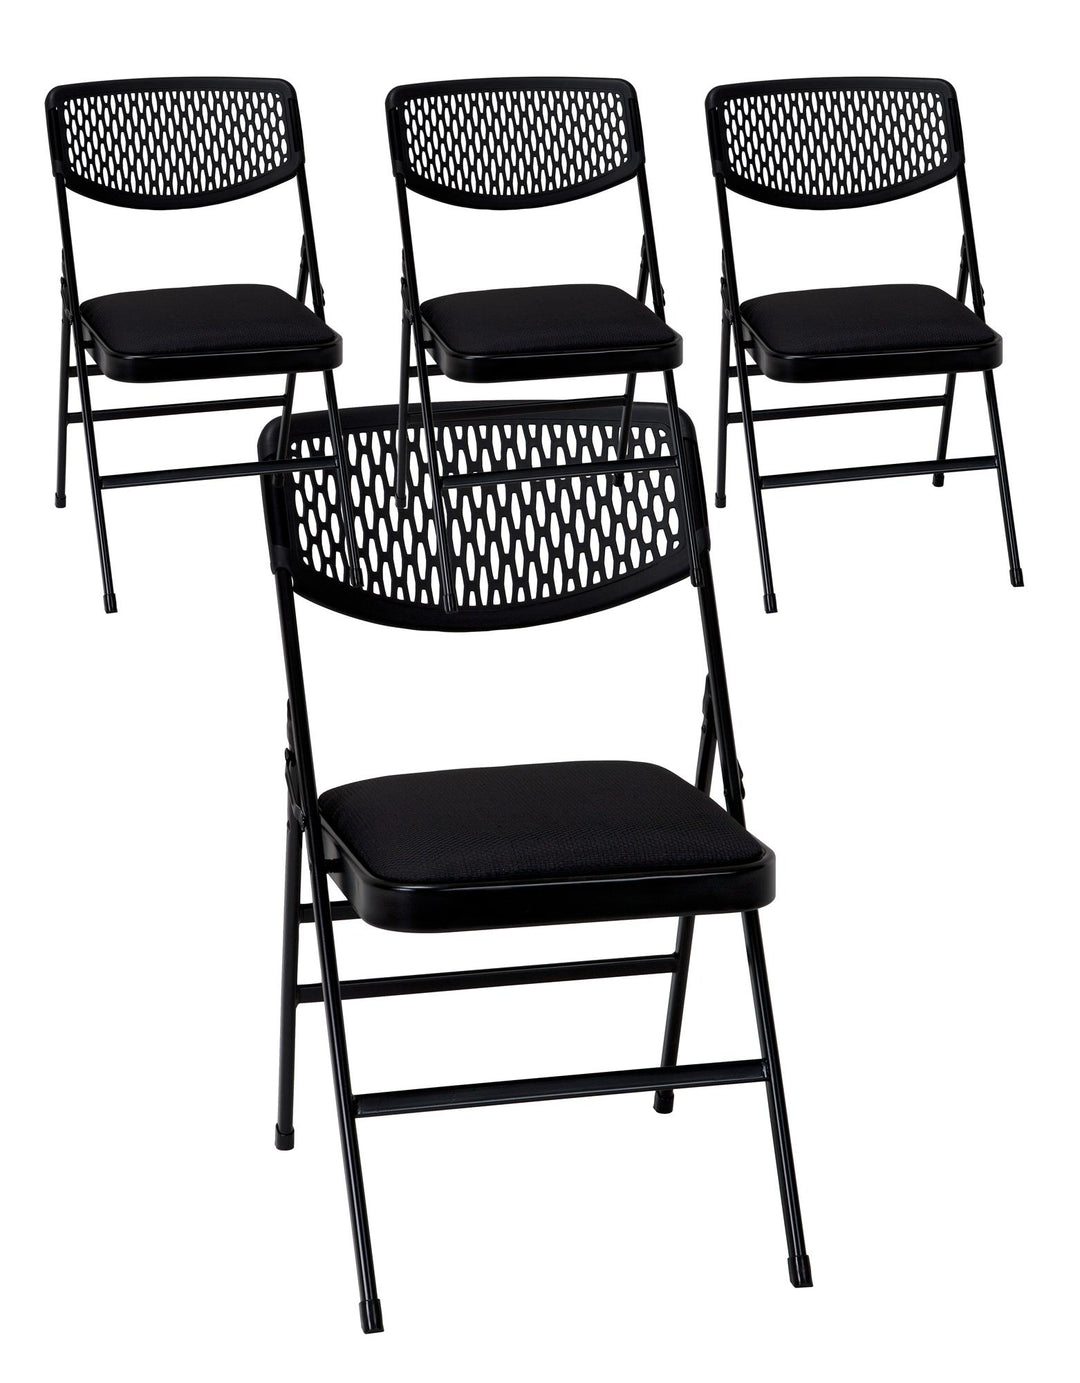 Ultra-Comfort Commercial XL Premium Fabric Padded Folding Chair Set -  Black - 4 PacK